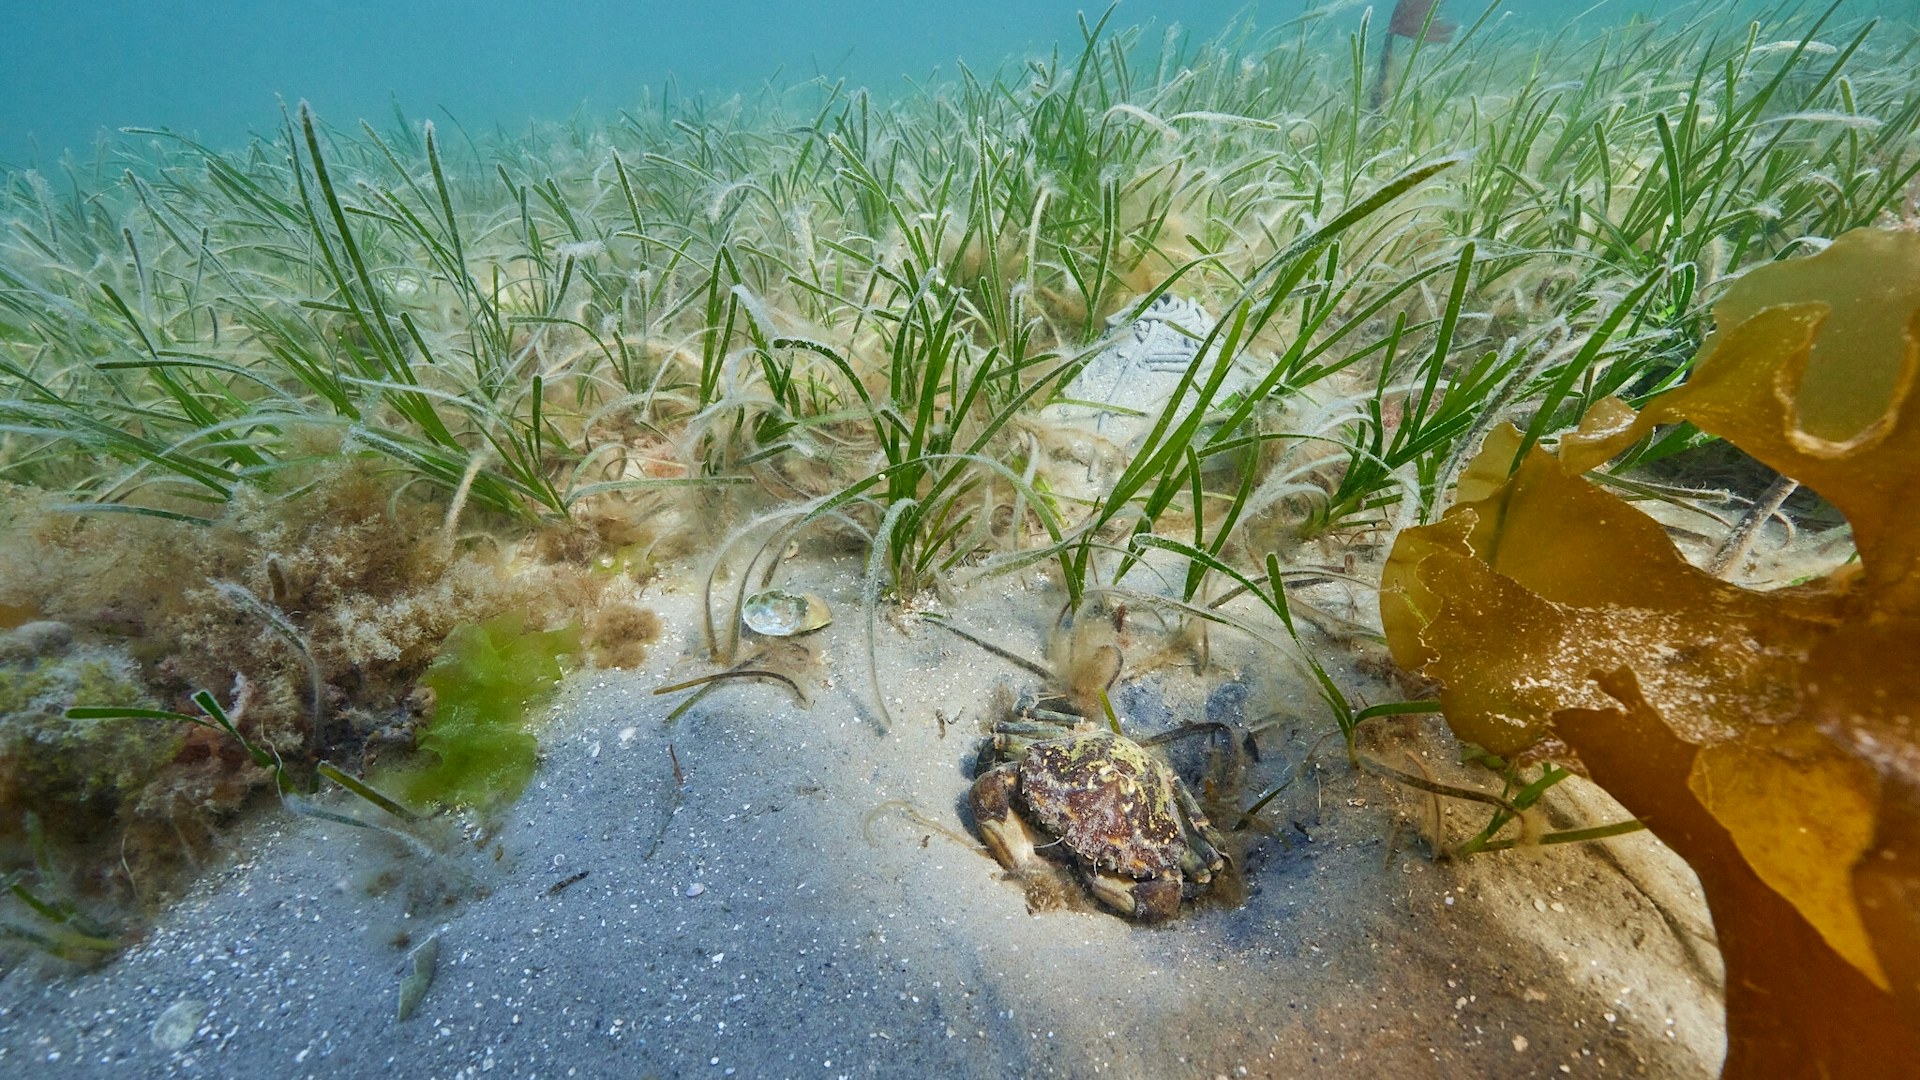 Seagrass and crab in seagrass bed